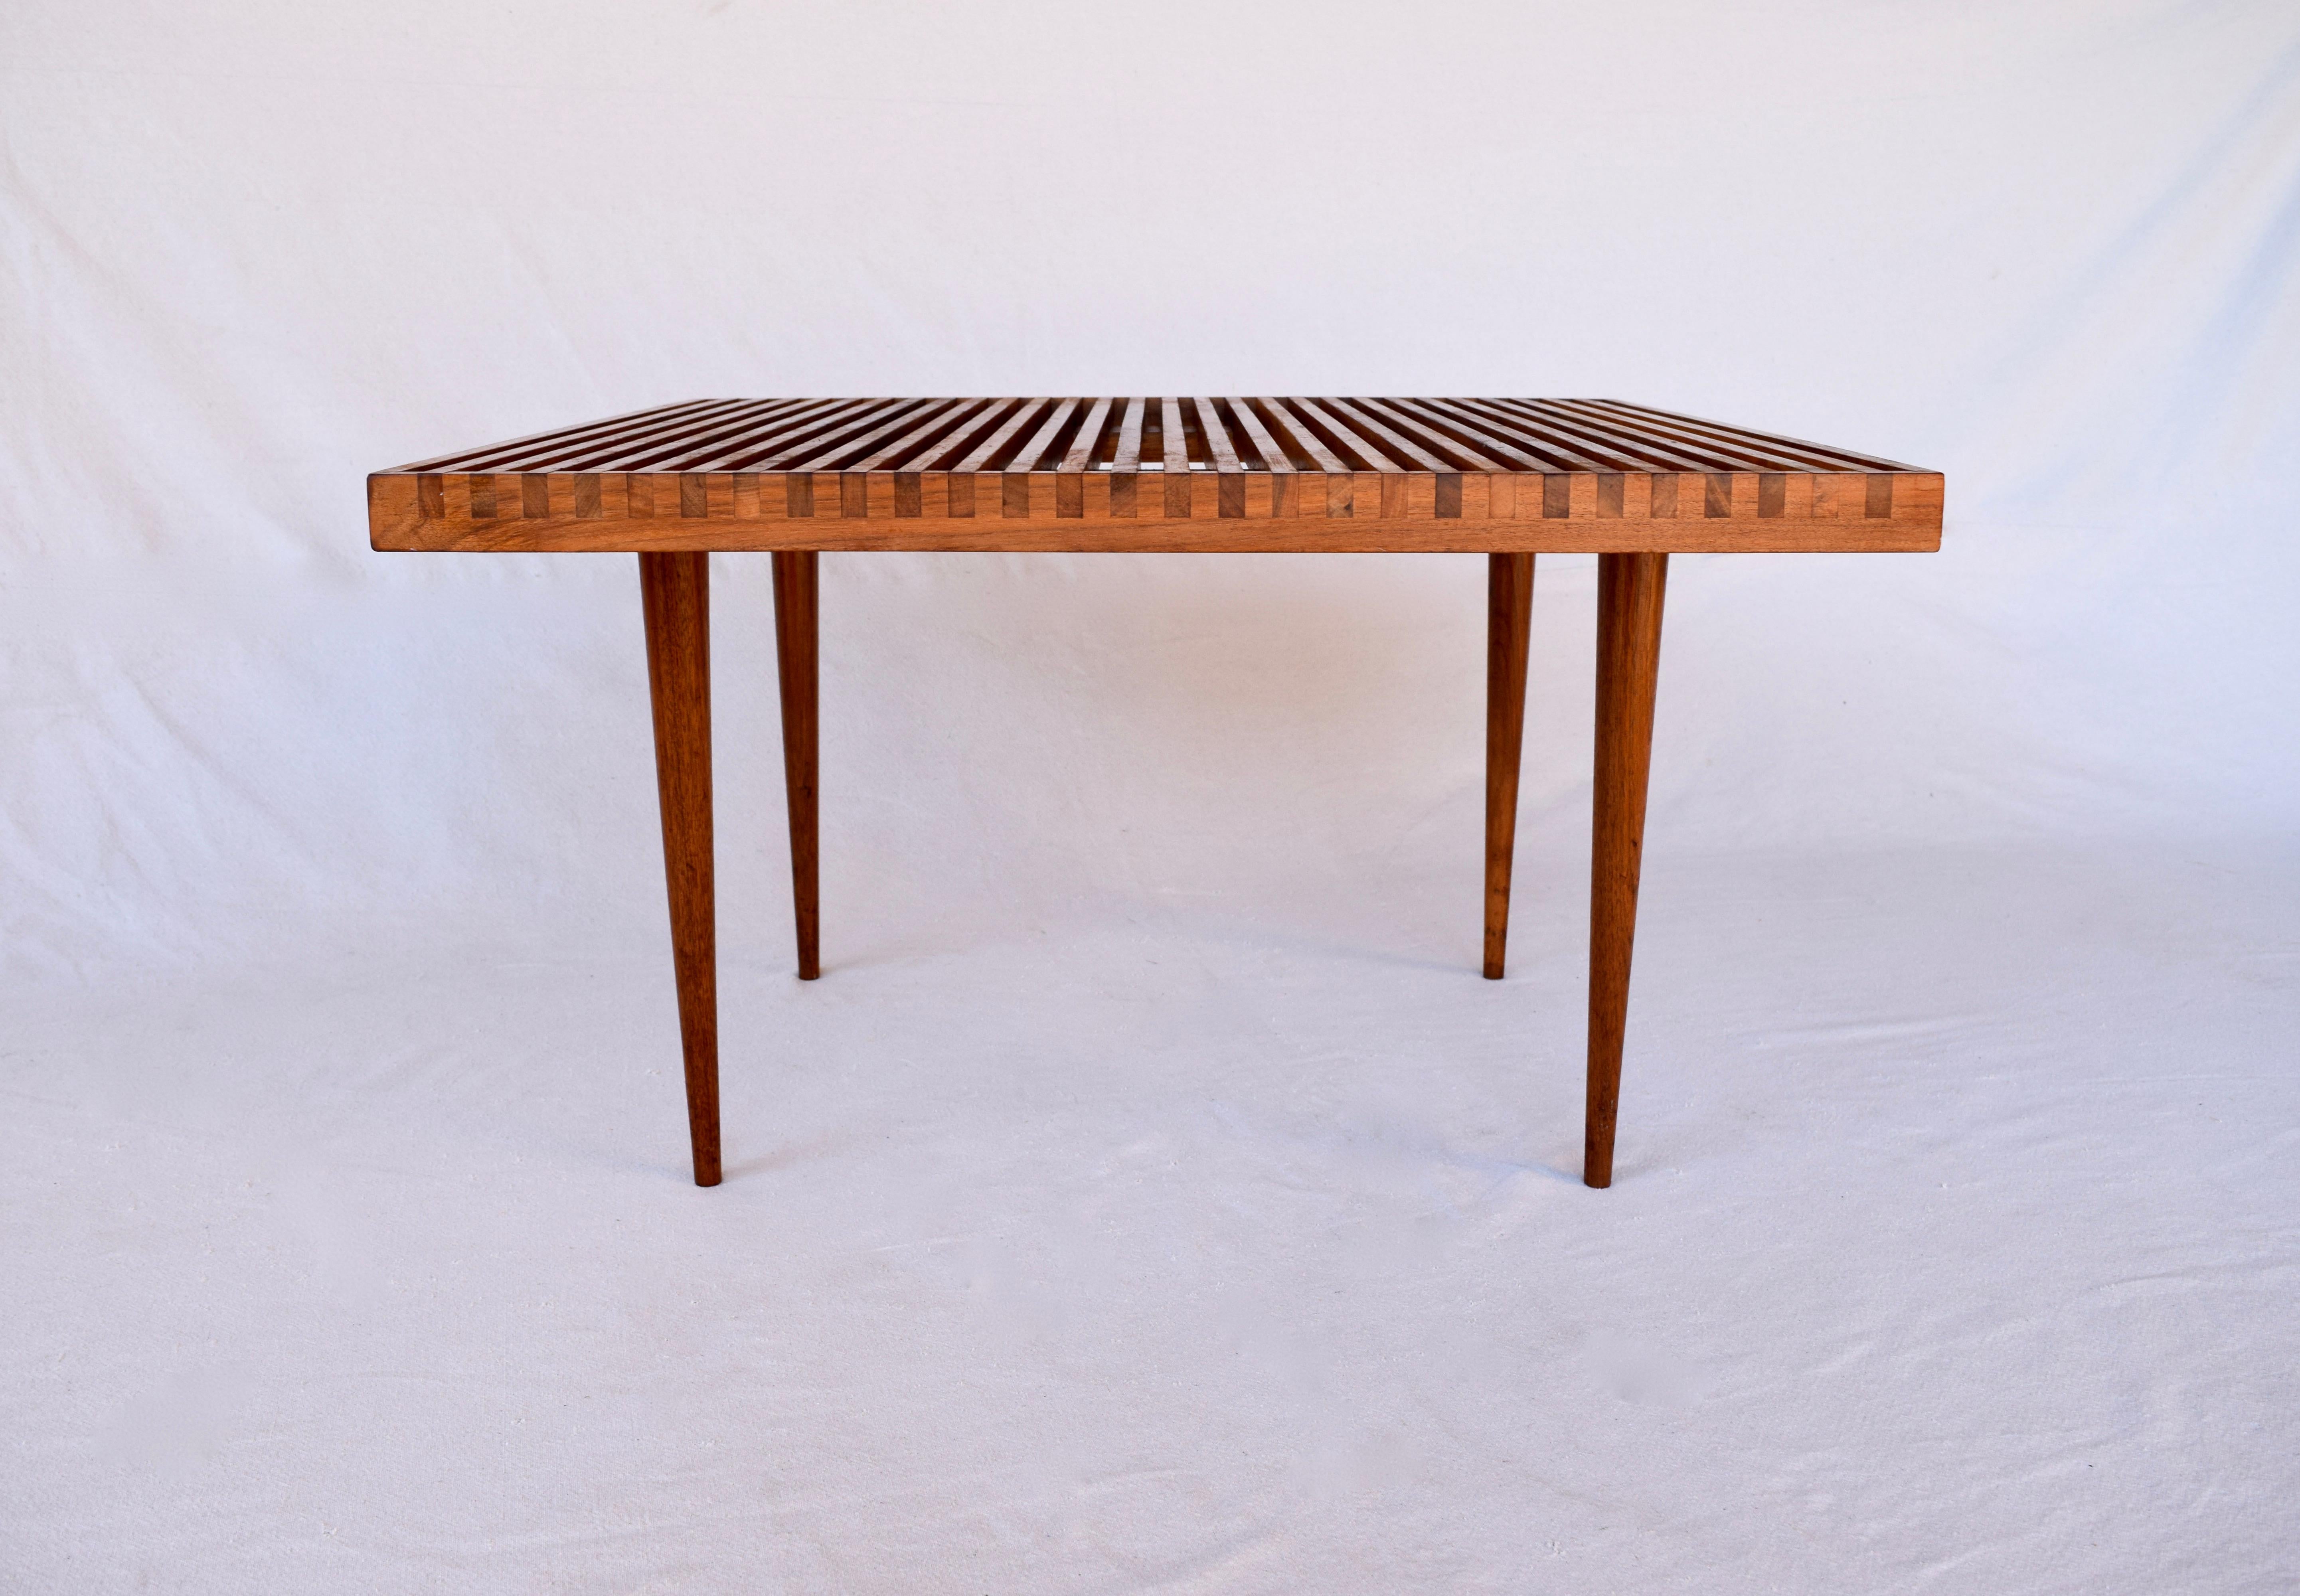 Walnut dovetailed slatted coffee table designed by Mel Smilow for Smilow-Thiele.
Unusual multifunctional square format and dimensions.